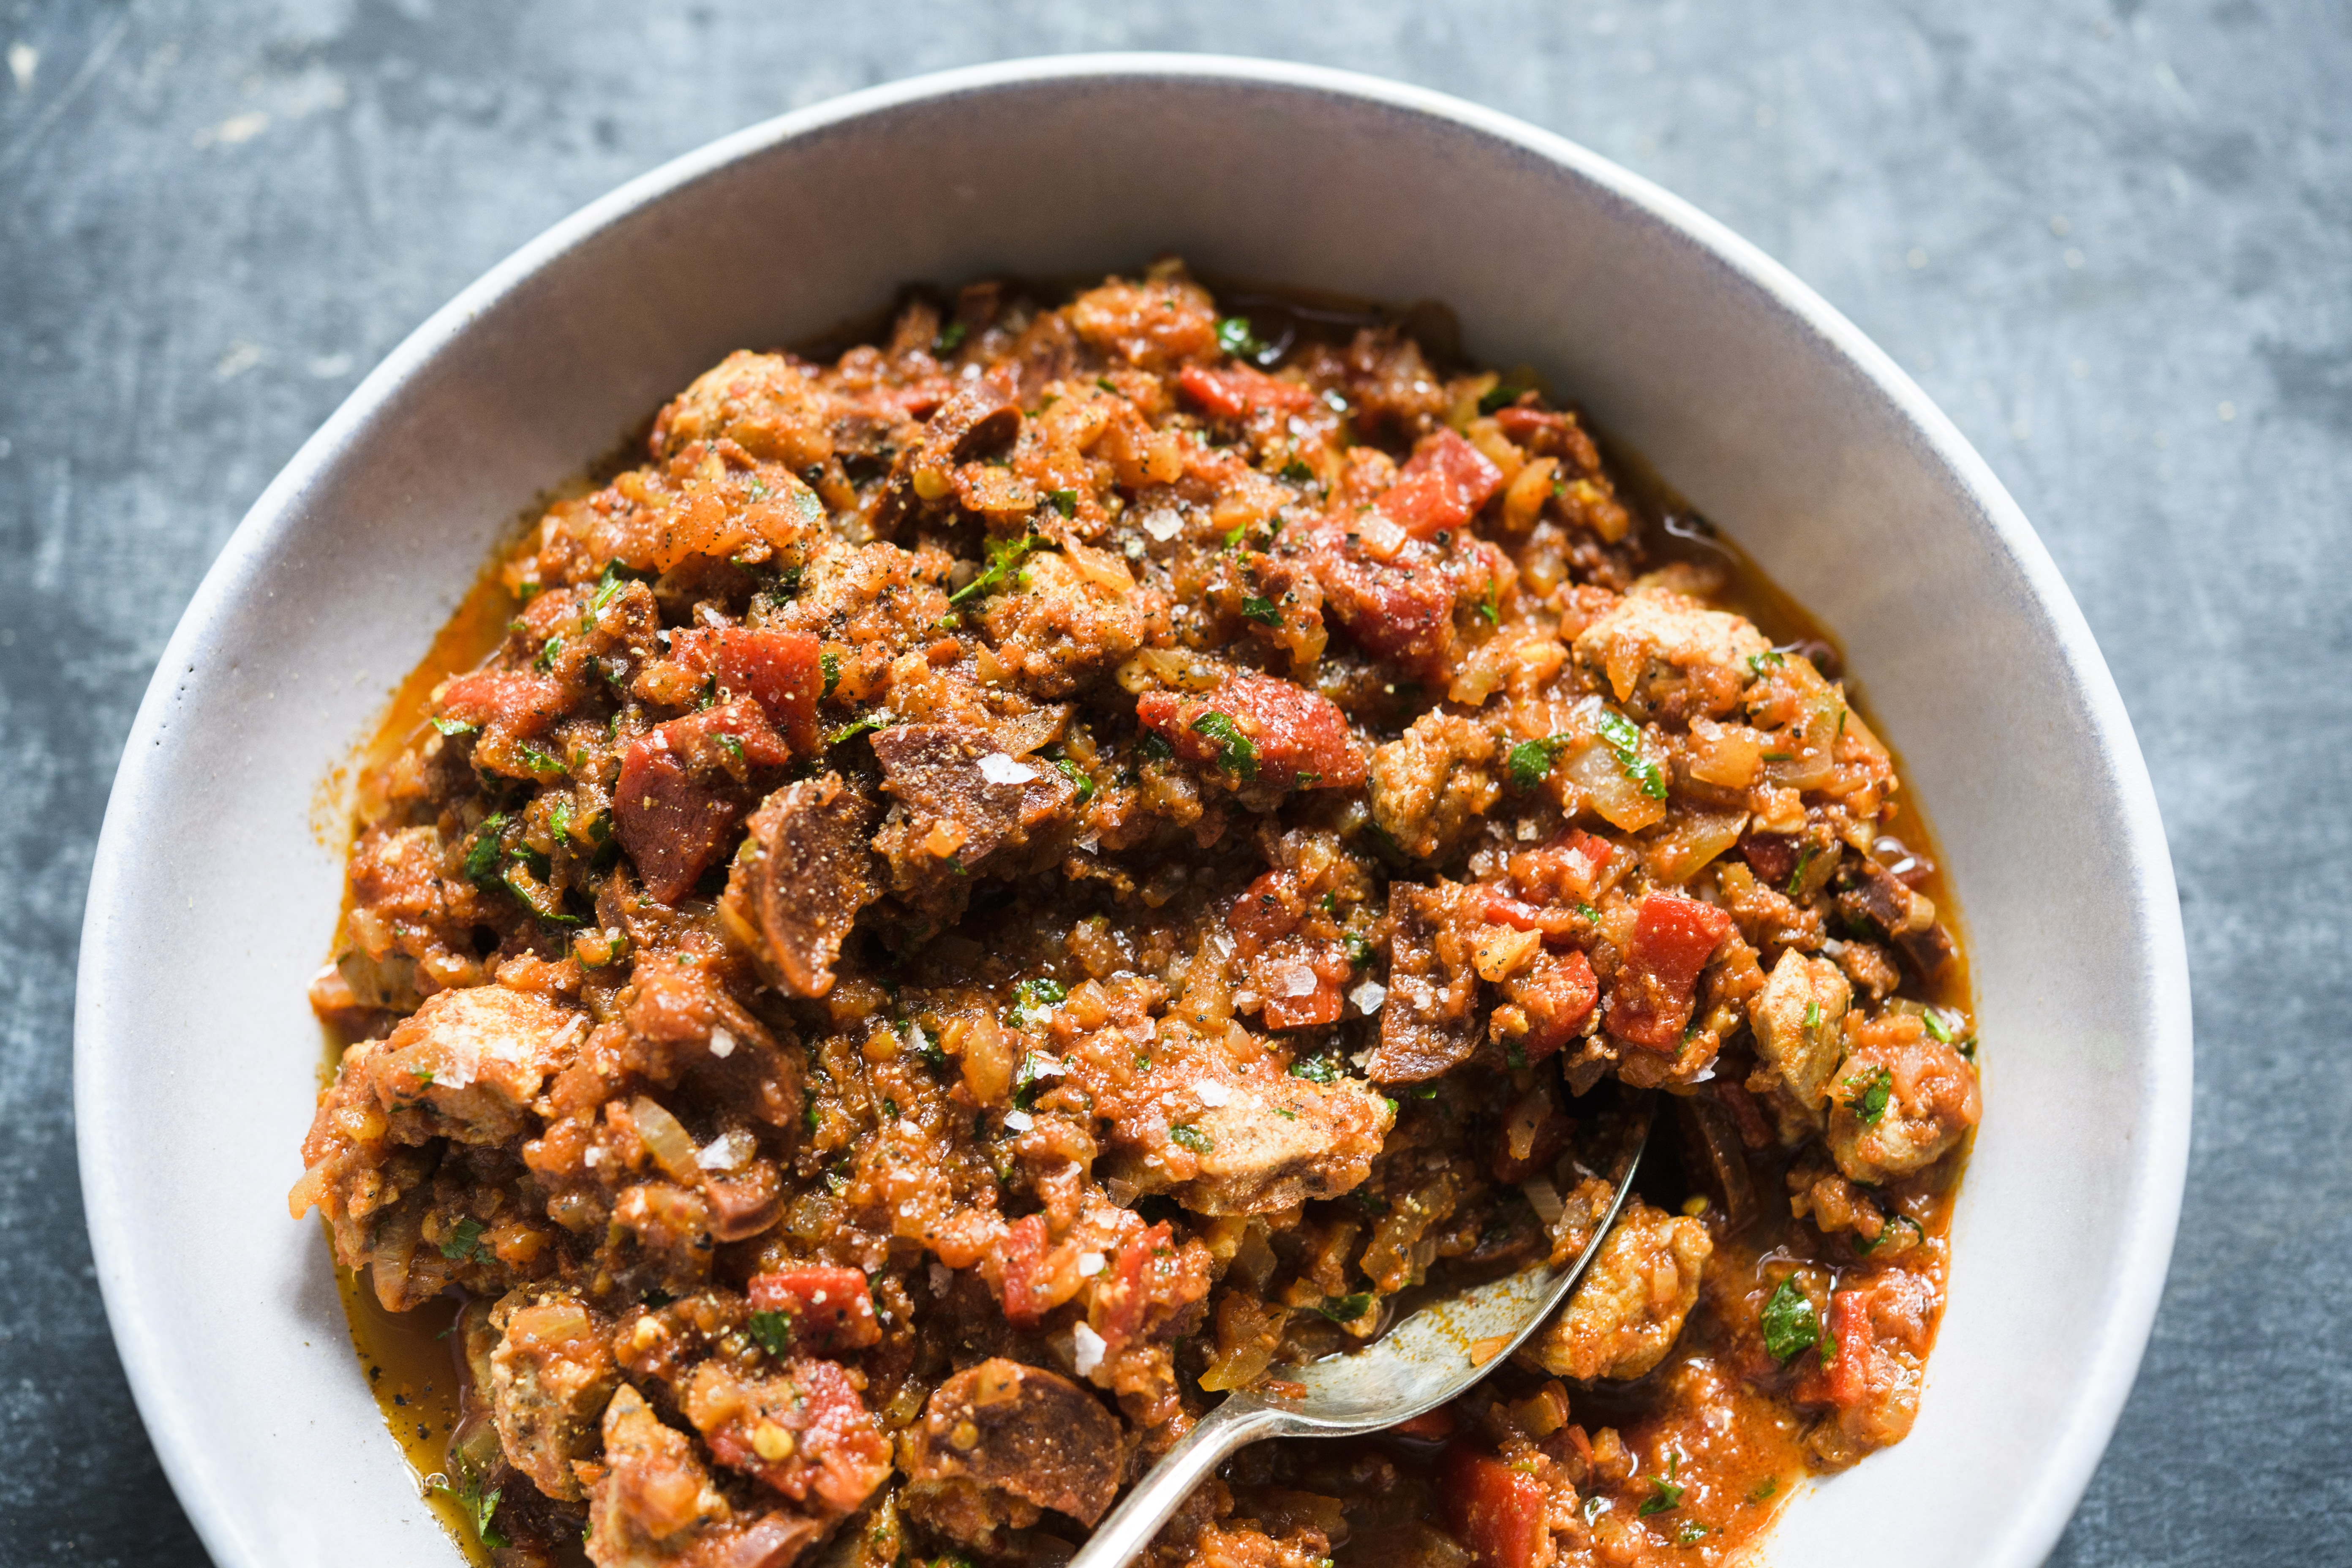 Pork and Chorizo Stew with Peppers (Carcamusa)